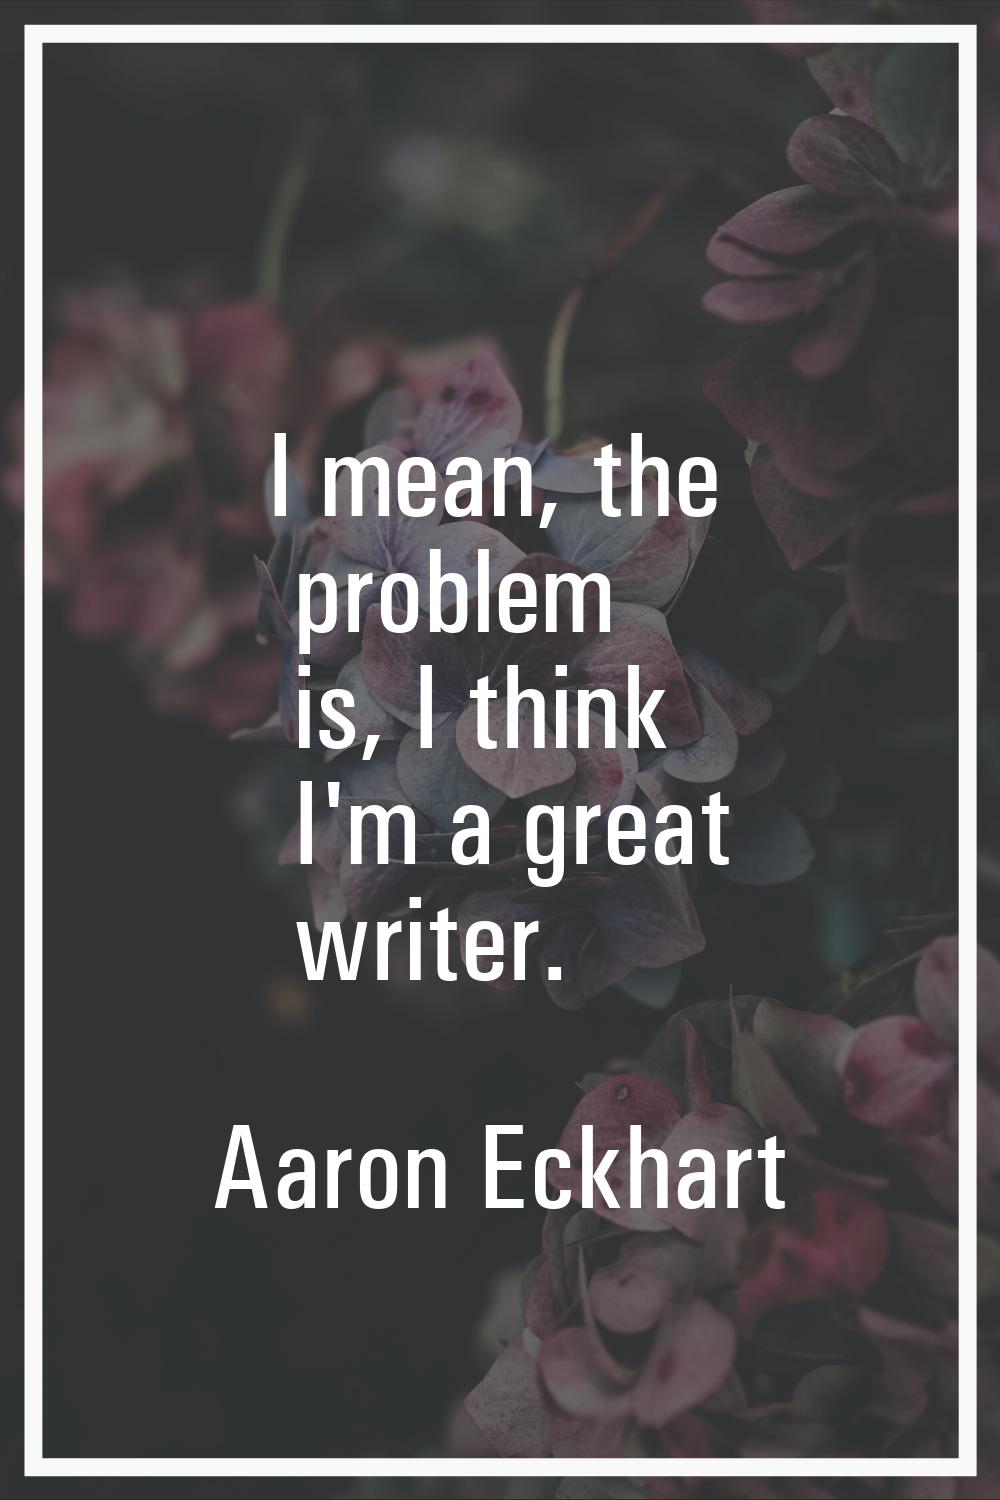 I mean, the problem is, I think I'm a great writer.